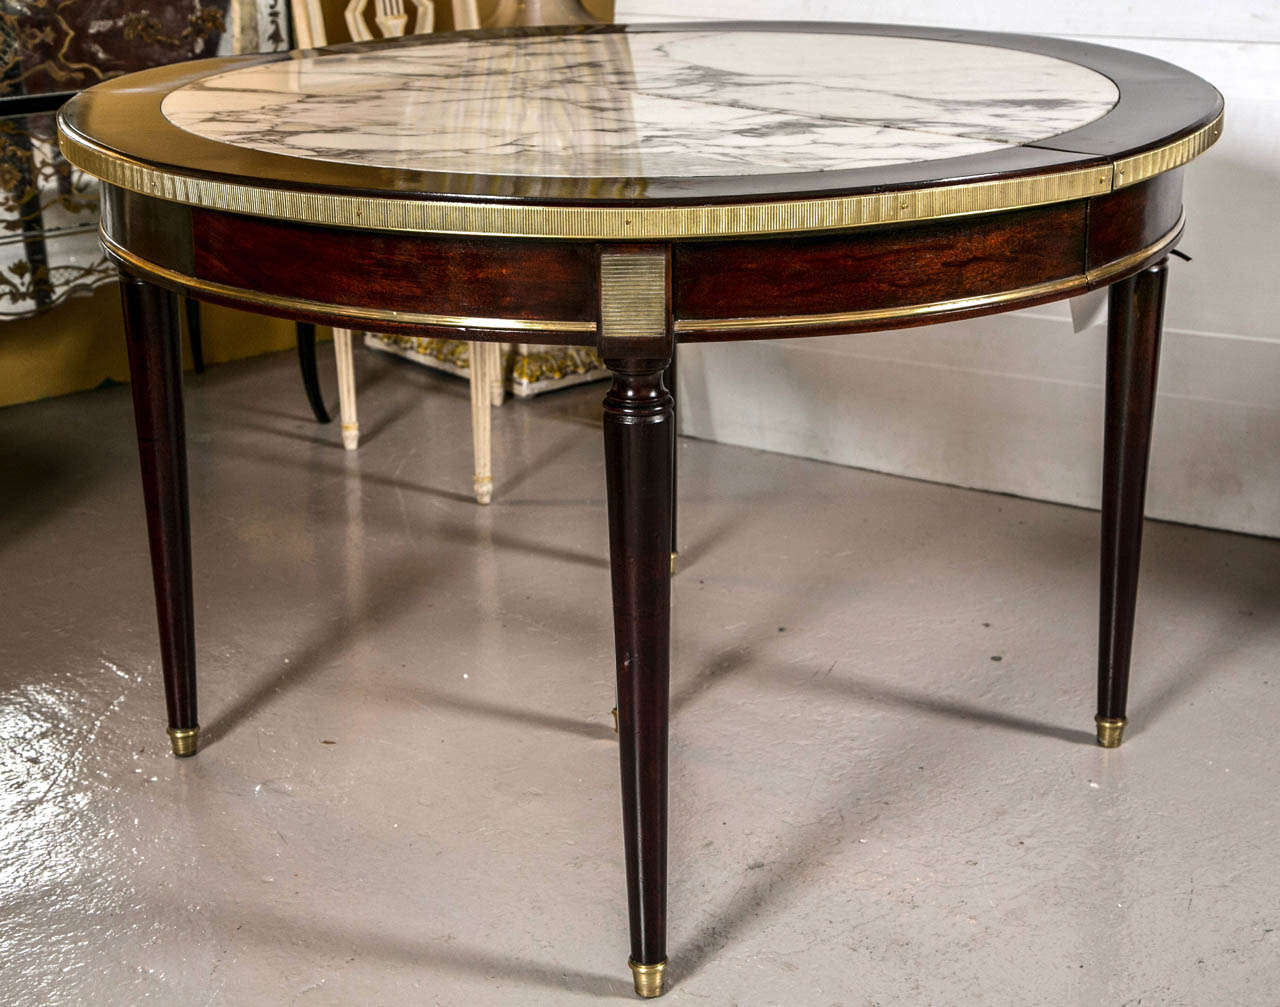 A one of a kind two leaf circular dining table by Maison Jansen. The fine Louis XVI Style tapering legs supporting a bronze mounted apron leading to a finely cast bronze mounted and framed mahogany table top. The top having four removable Carrera